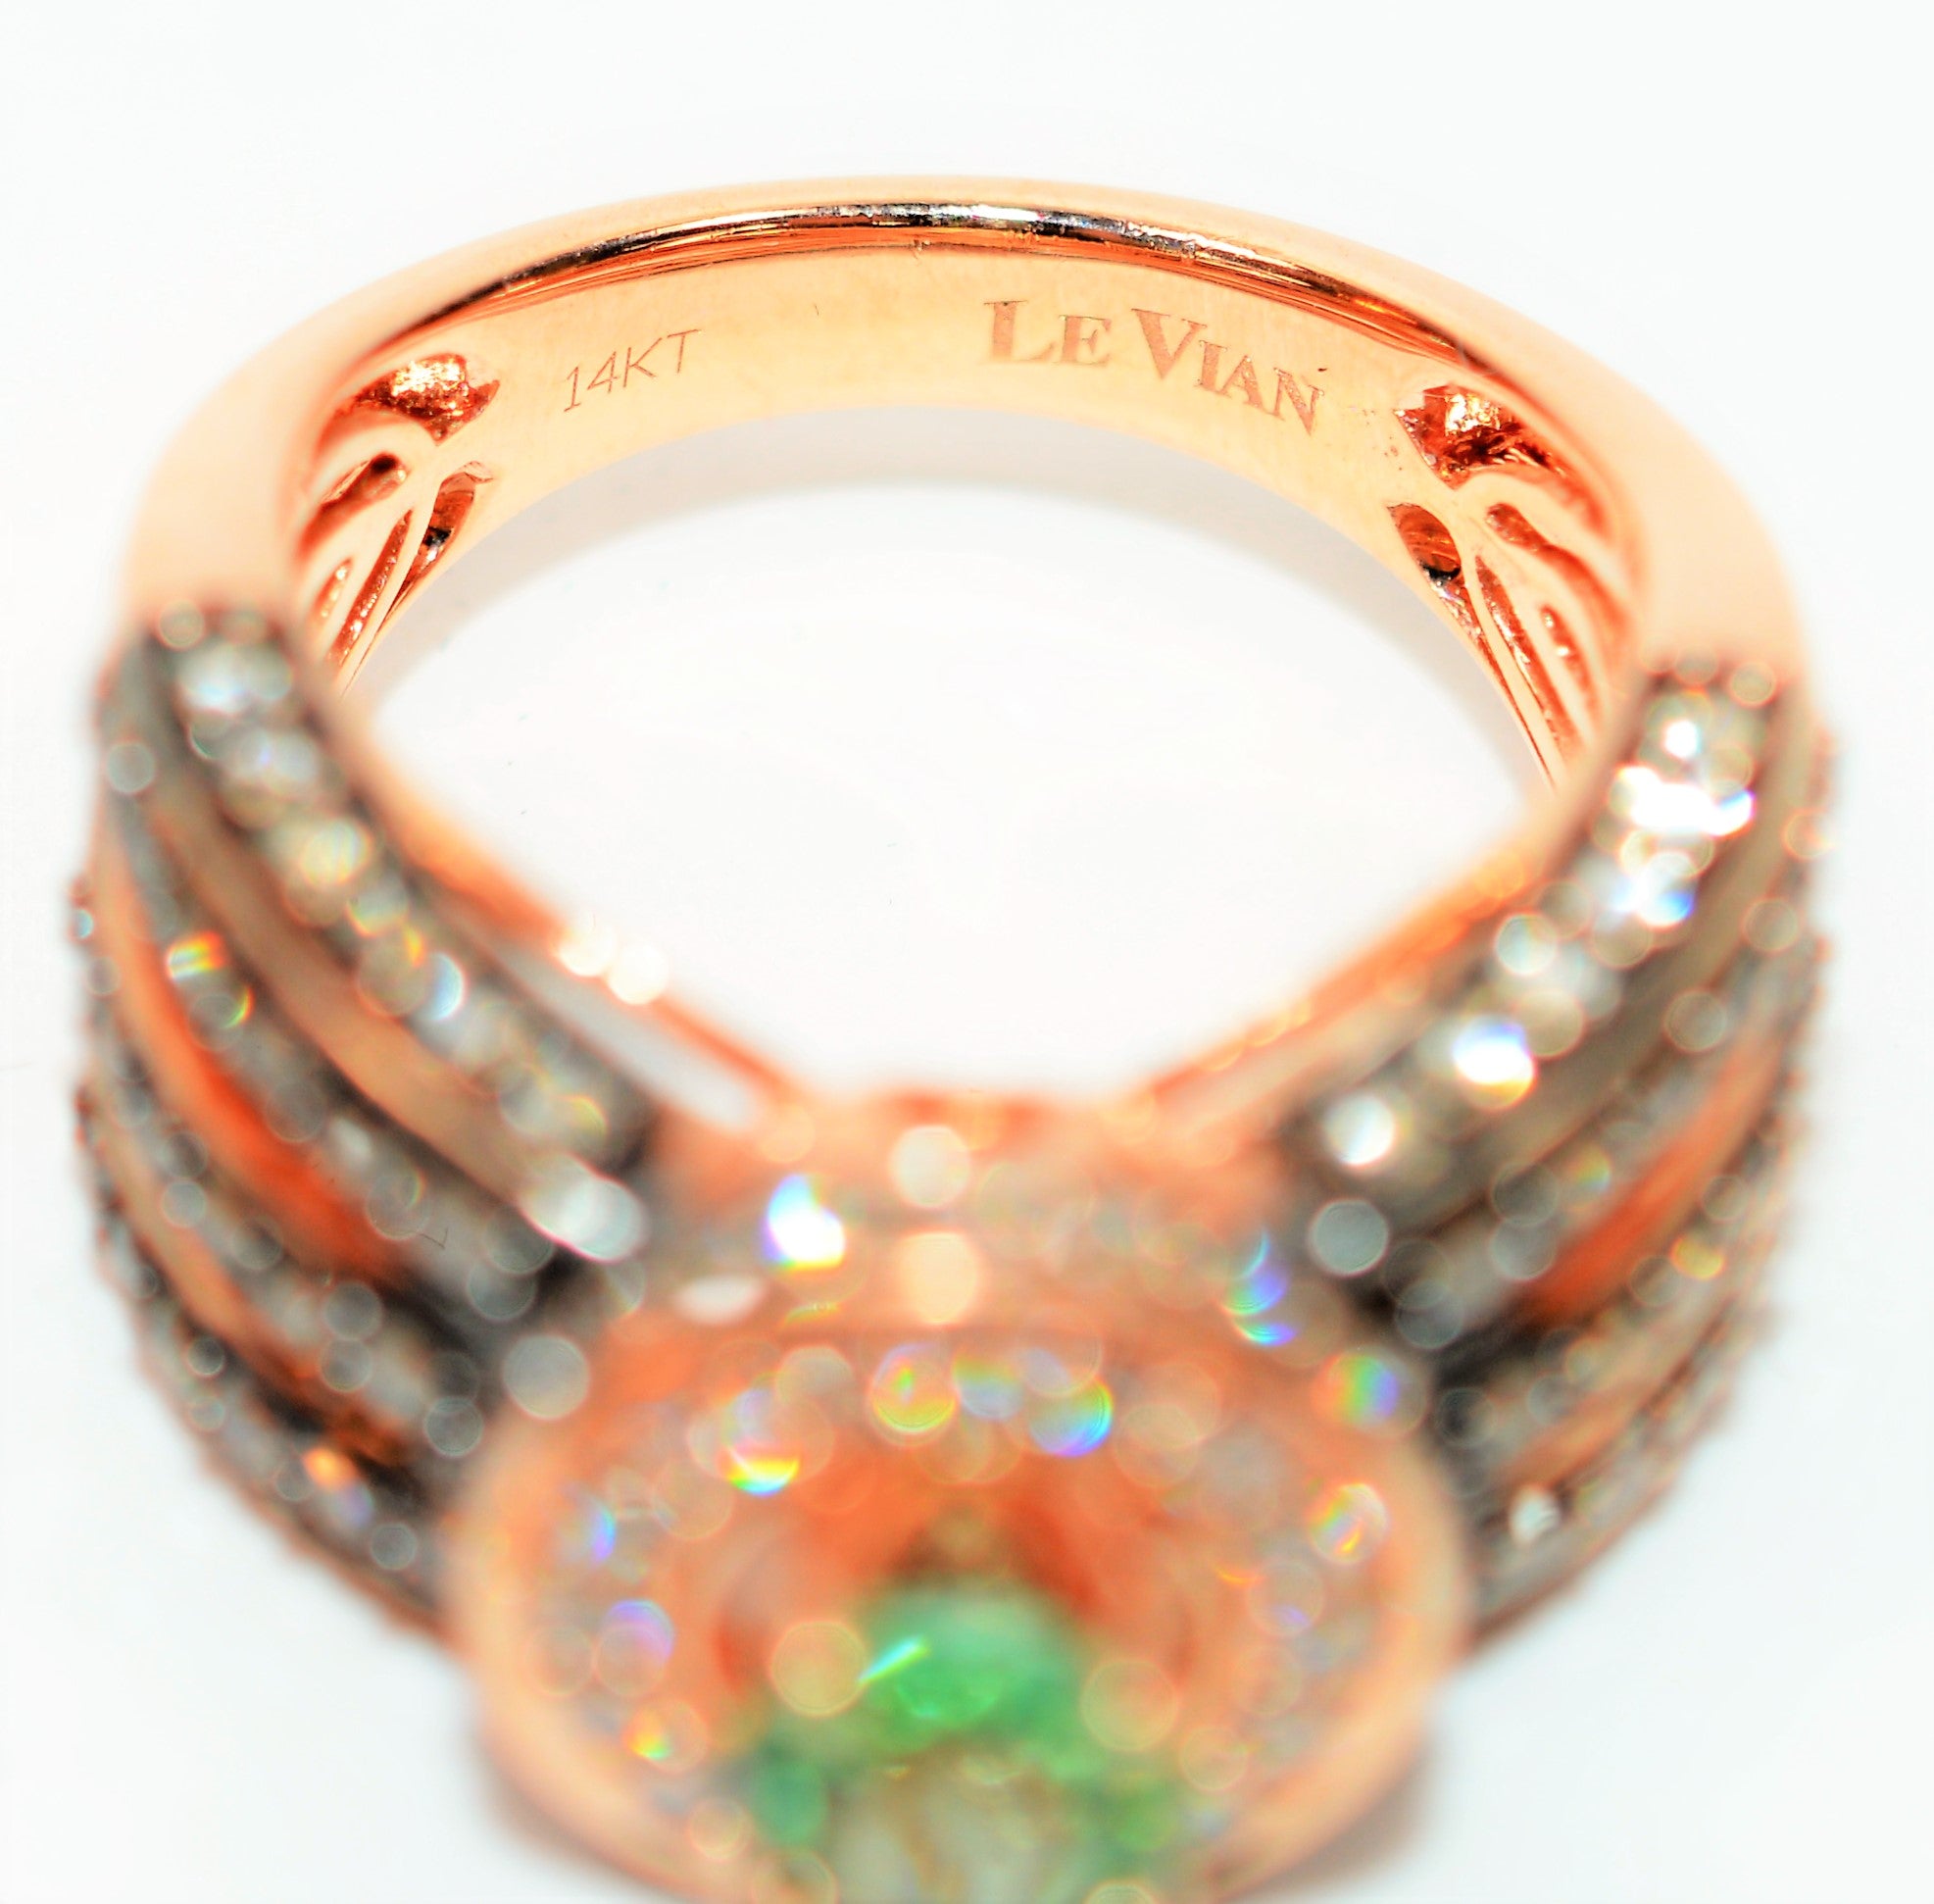 Limited Edition Trunk Special LeVian Natural Paraiba Tourmaline & Chocolate Diamond Ring 14K Rose Gold Color 2.21tcw Cocktail Ring